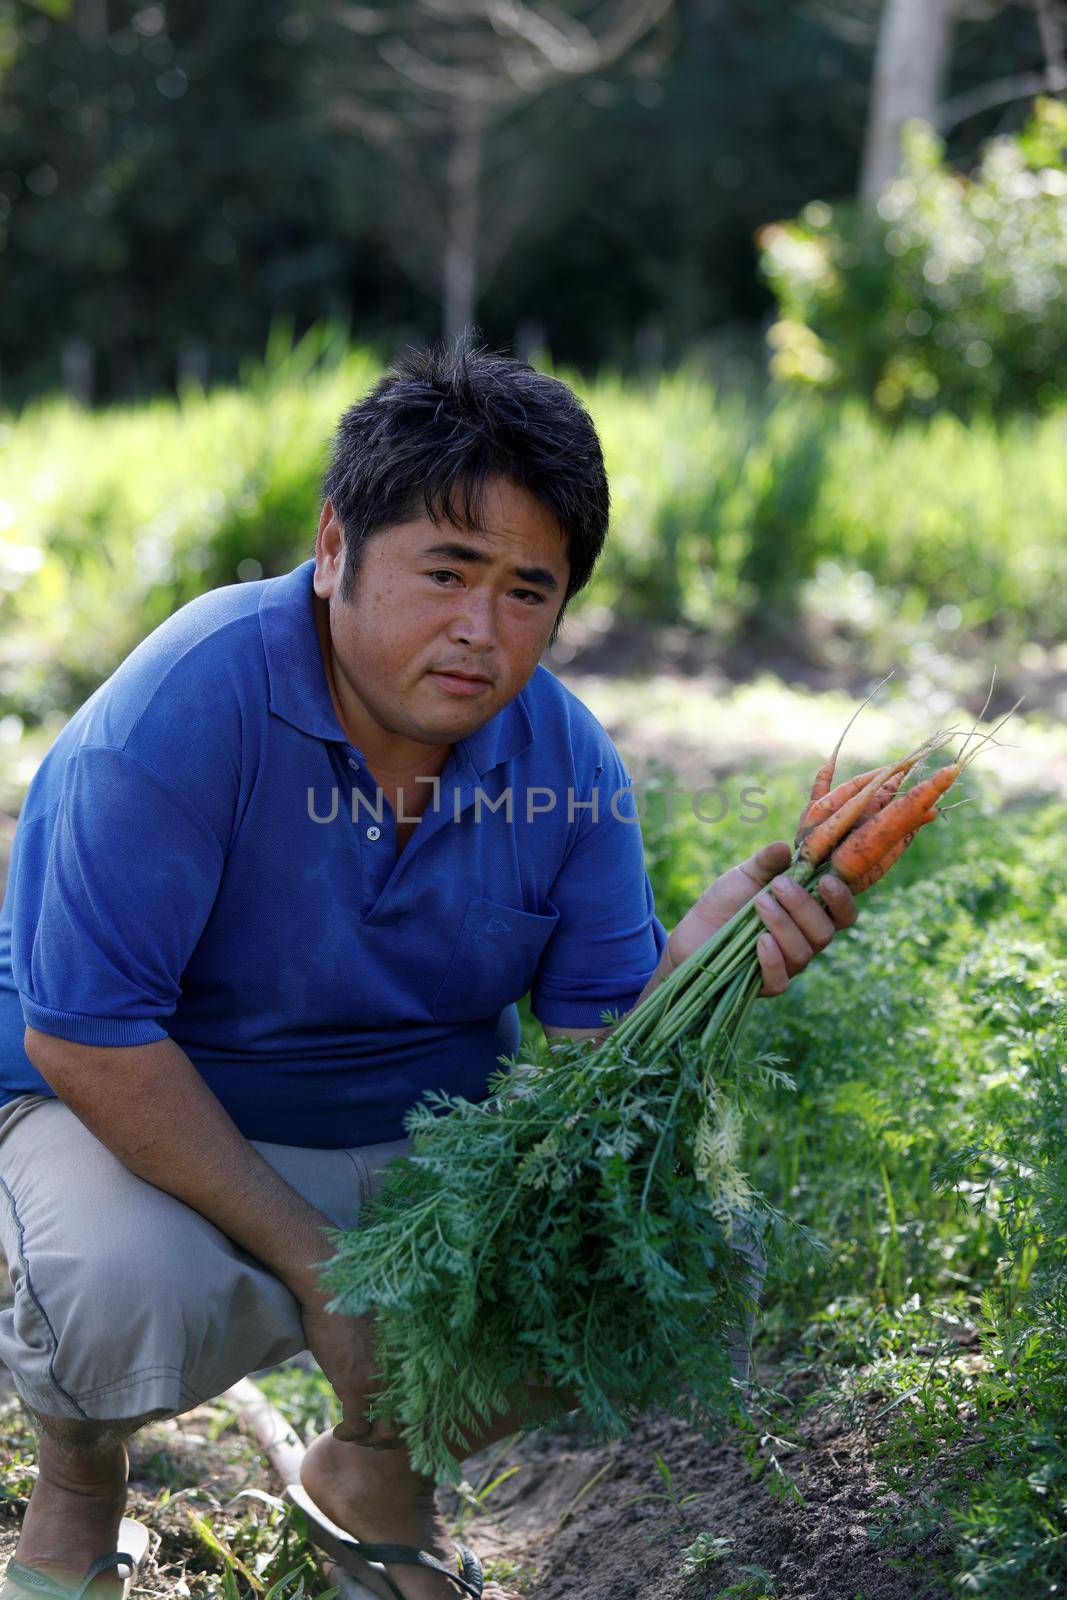 japanese working in agriculture by joasouza